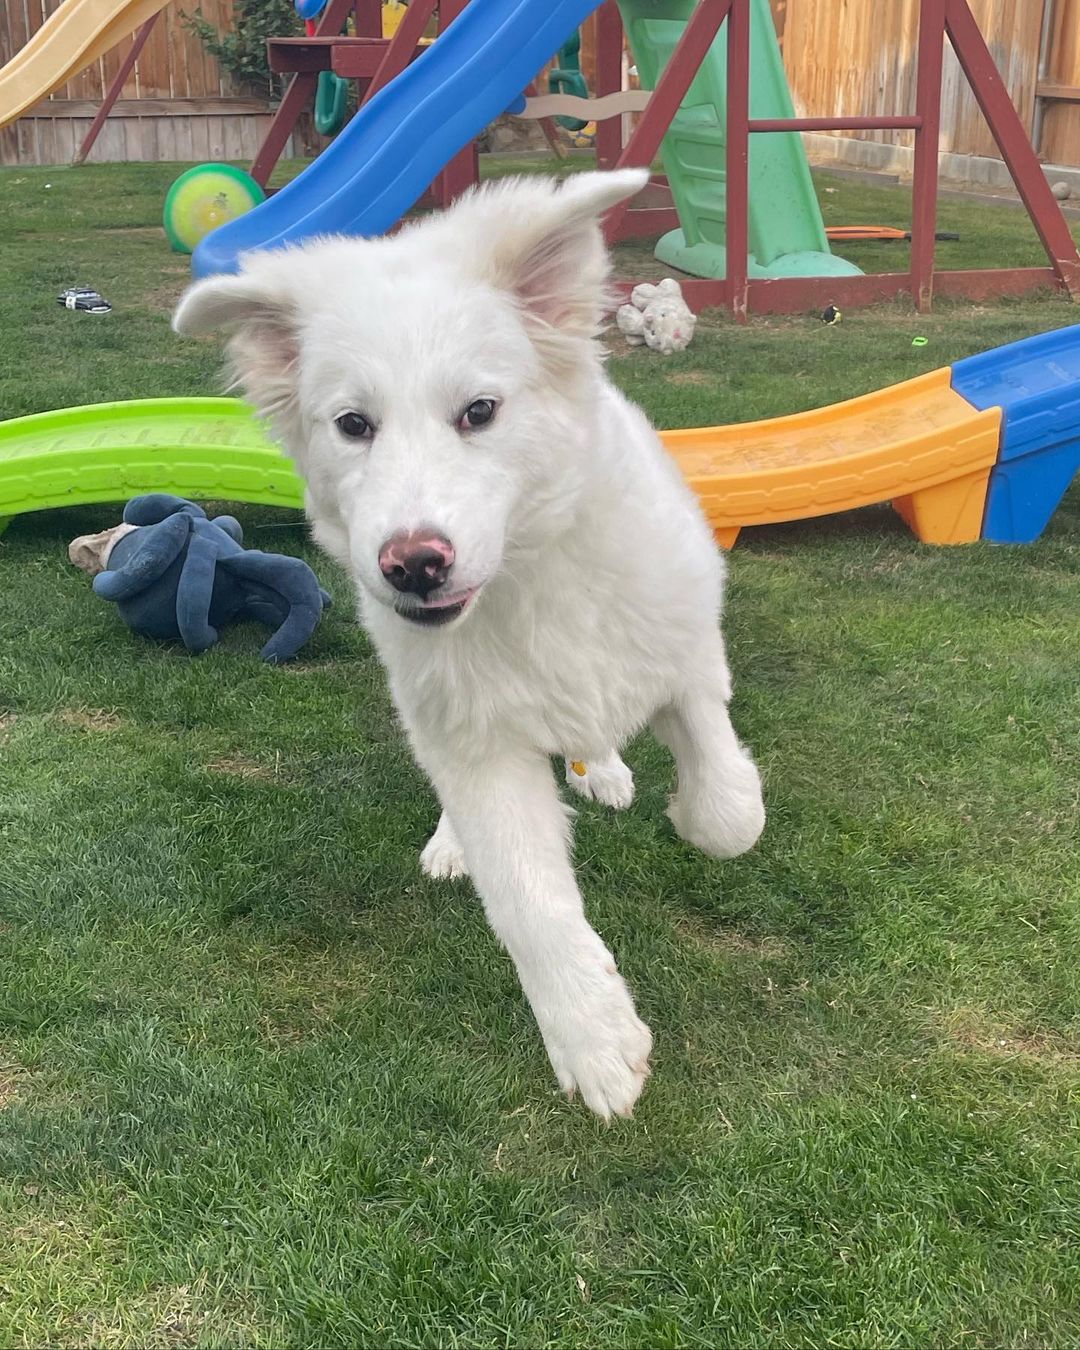 Remember the Great Pyrenees puppy surrendered to the vet because she had parvo… well look at her now! She is a healthy, playful, 40+ pound, 5 month old big puppy! 🐶 

<a target='_blank' href='https://www.instagram.com/explore/tags/greatpyreneespuppy/'>#greatpyreneespuppy</a> <a target='_blank' href='https://www.instagram.com/explore/tags/asafefurrplace/'>#asafefurrplace</a> <a target='_blank' href='https://www.instagram.com/explore/tags/happypuppy/'>#happypuppy</a> 
<a target='_blank' href='https://www.instagram.com/explore/tags/fosteringsaveslives/'>#fosteringsaveslives</a> <a target='_blank' href='https://www.instagram.com/explore/tags/thankyou/'>#thankyou</a> <a target='_blank' href='https://www.instagram.com/explore/tags/pearl/'>#pearl</a>